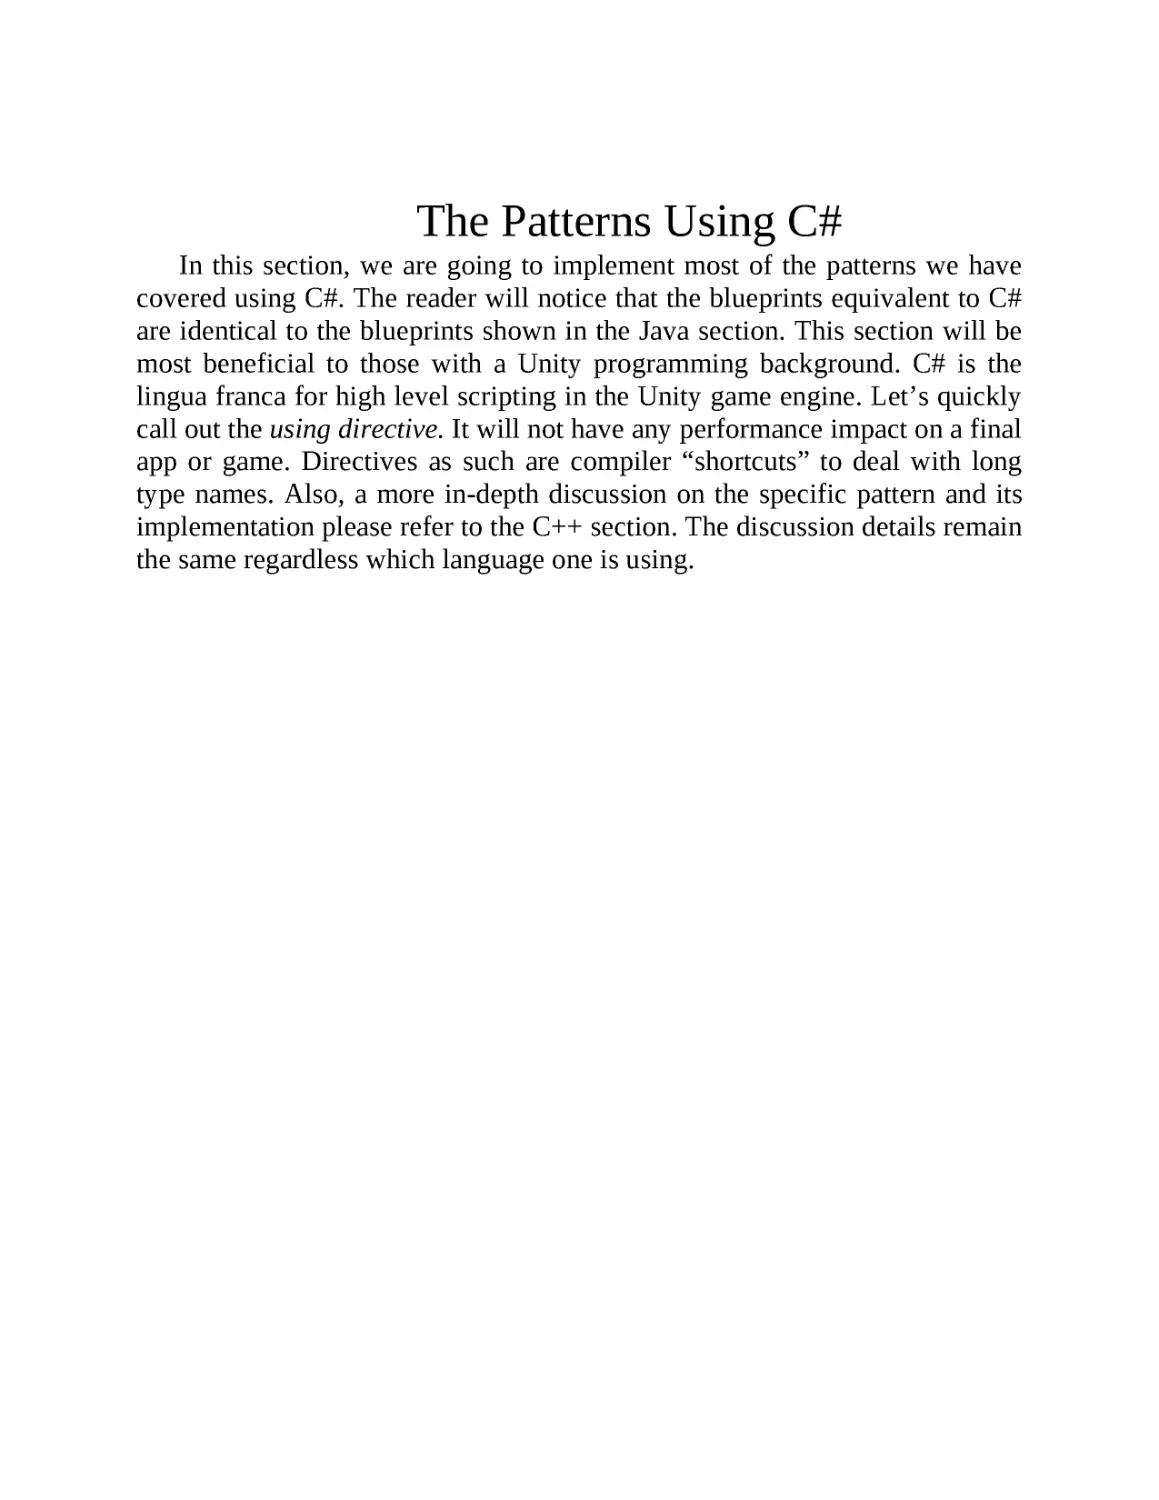 ﻿The Patterns Using C